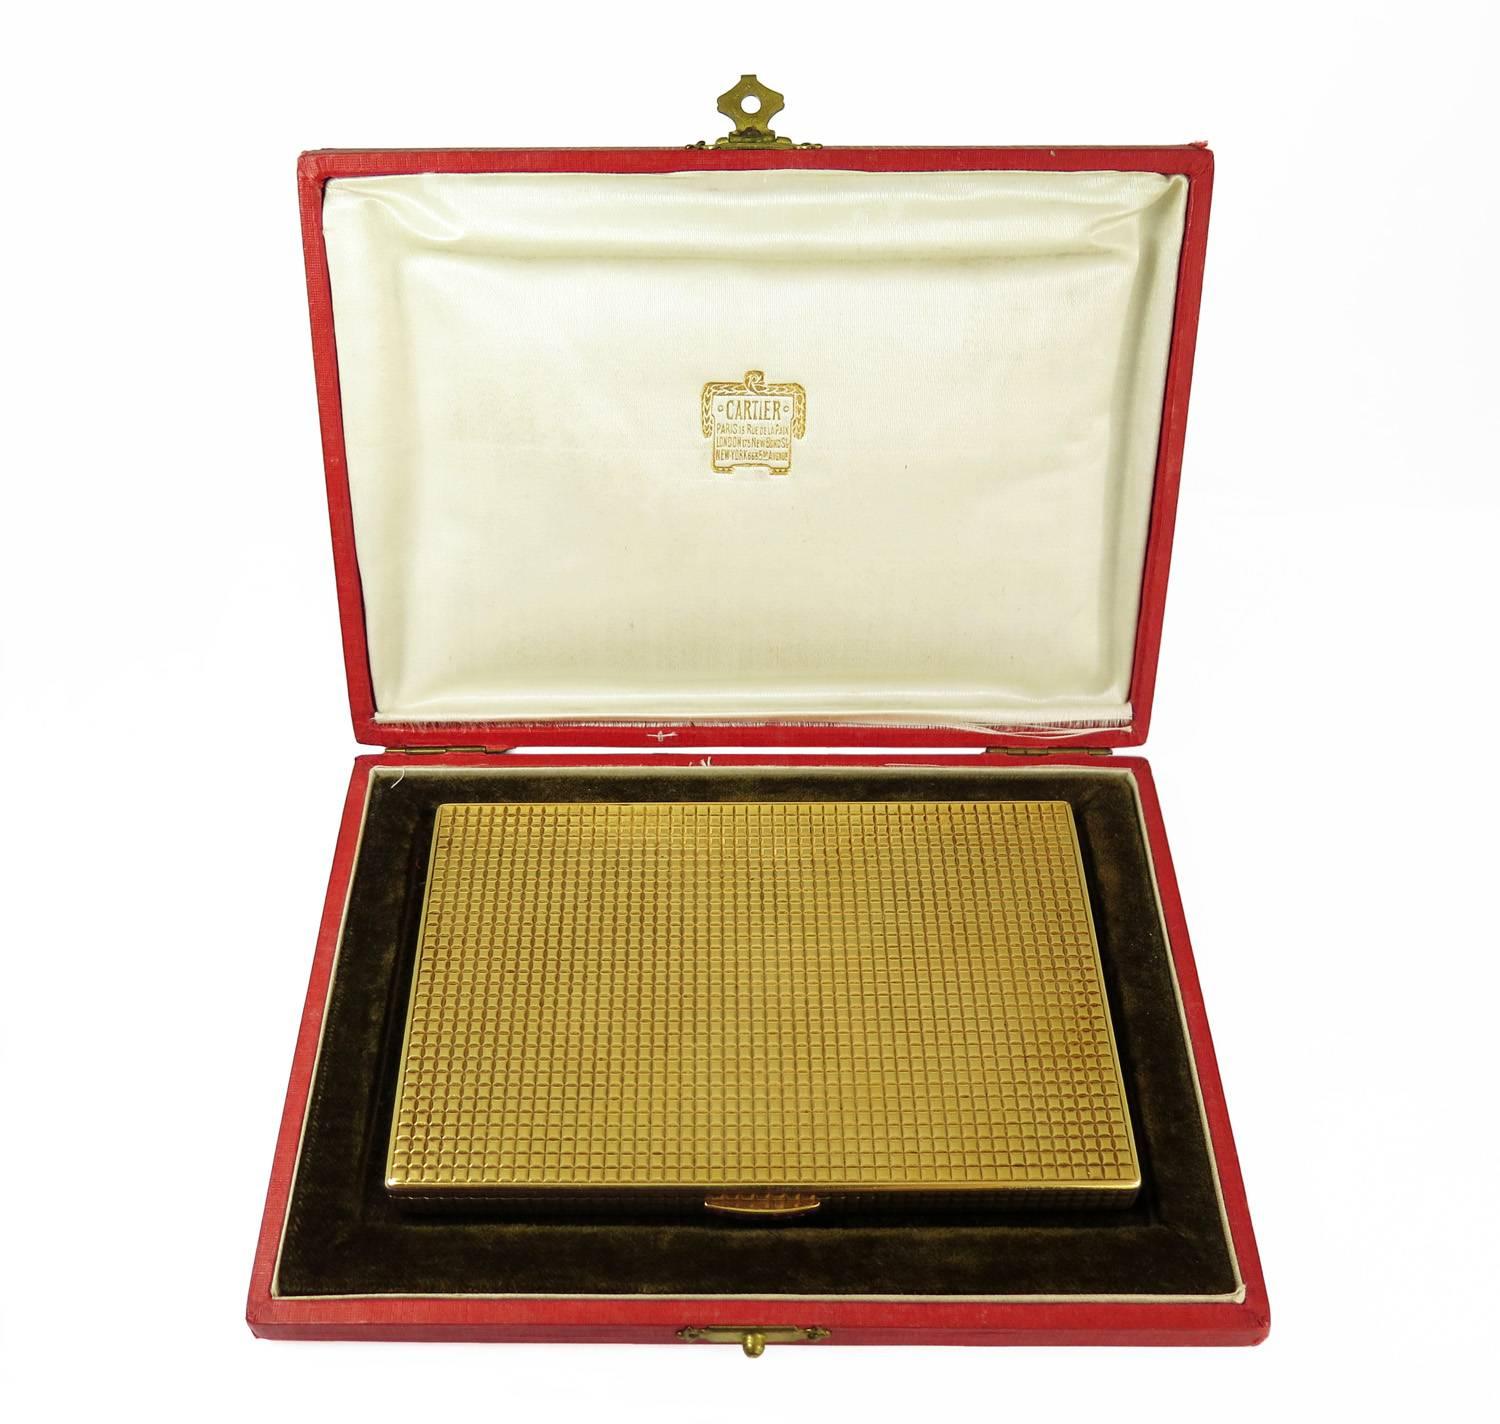 A handsome geometric patterned 18k gold box by Cartier, Paris. The clasp set with seven faceted rubies. Signed 